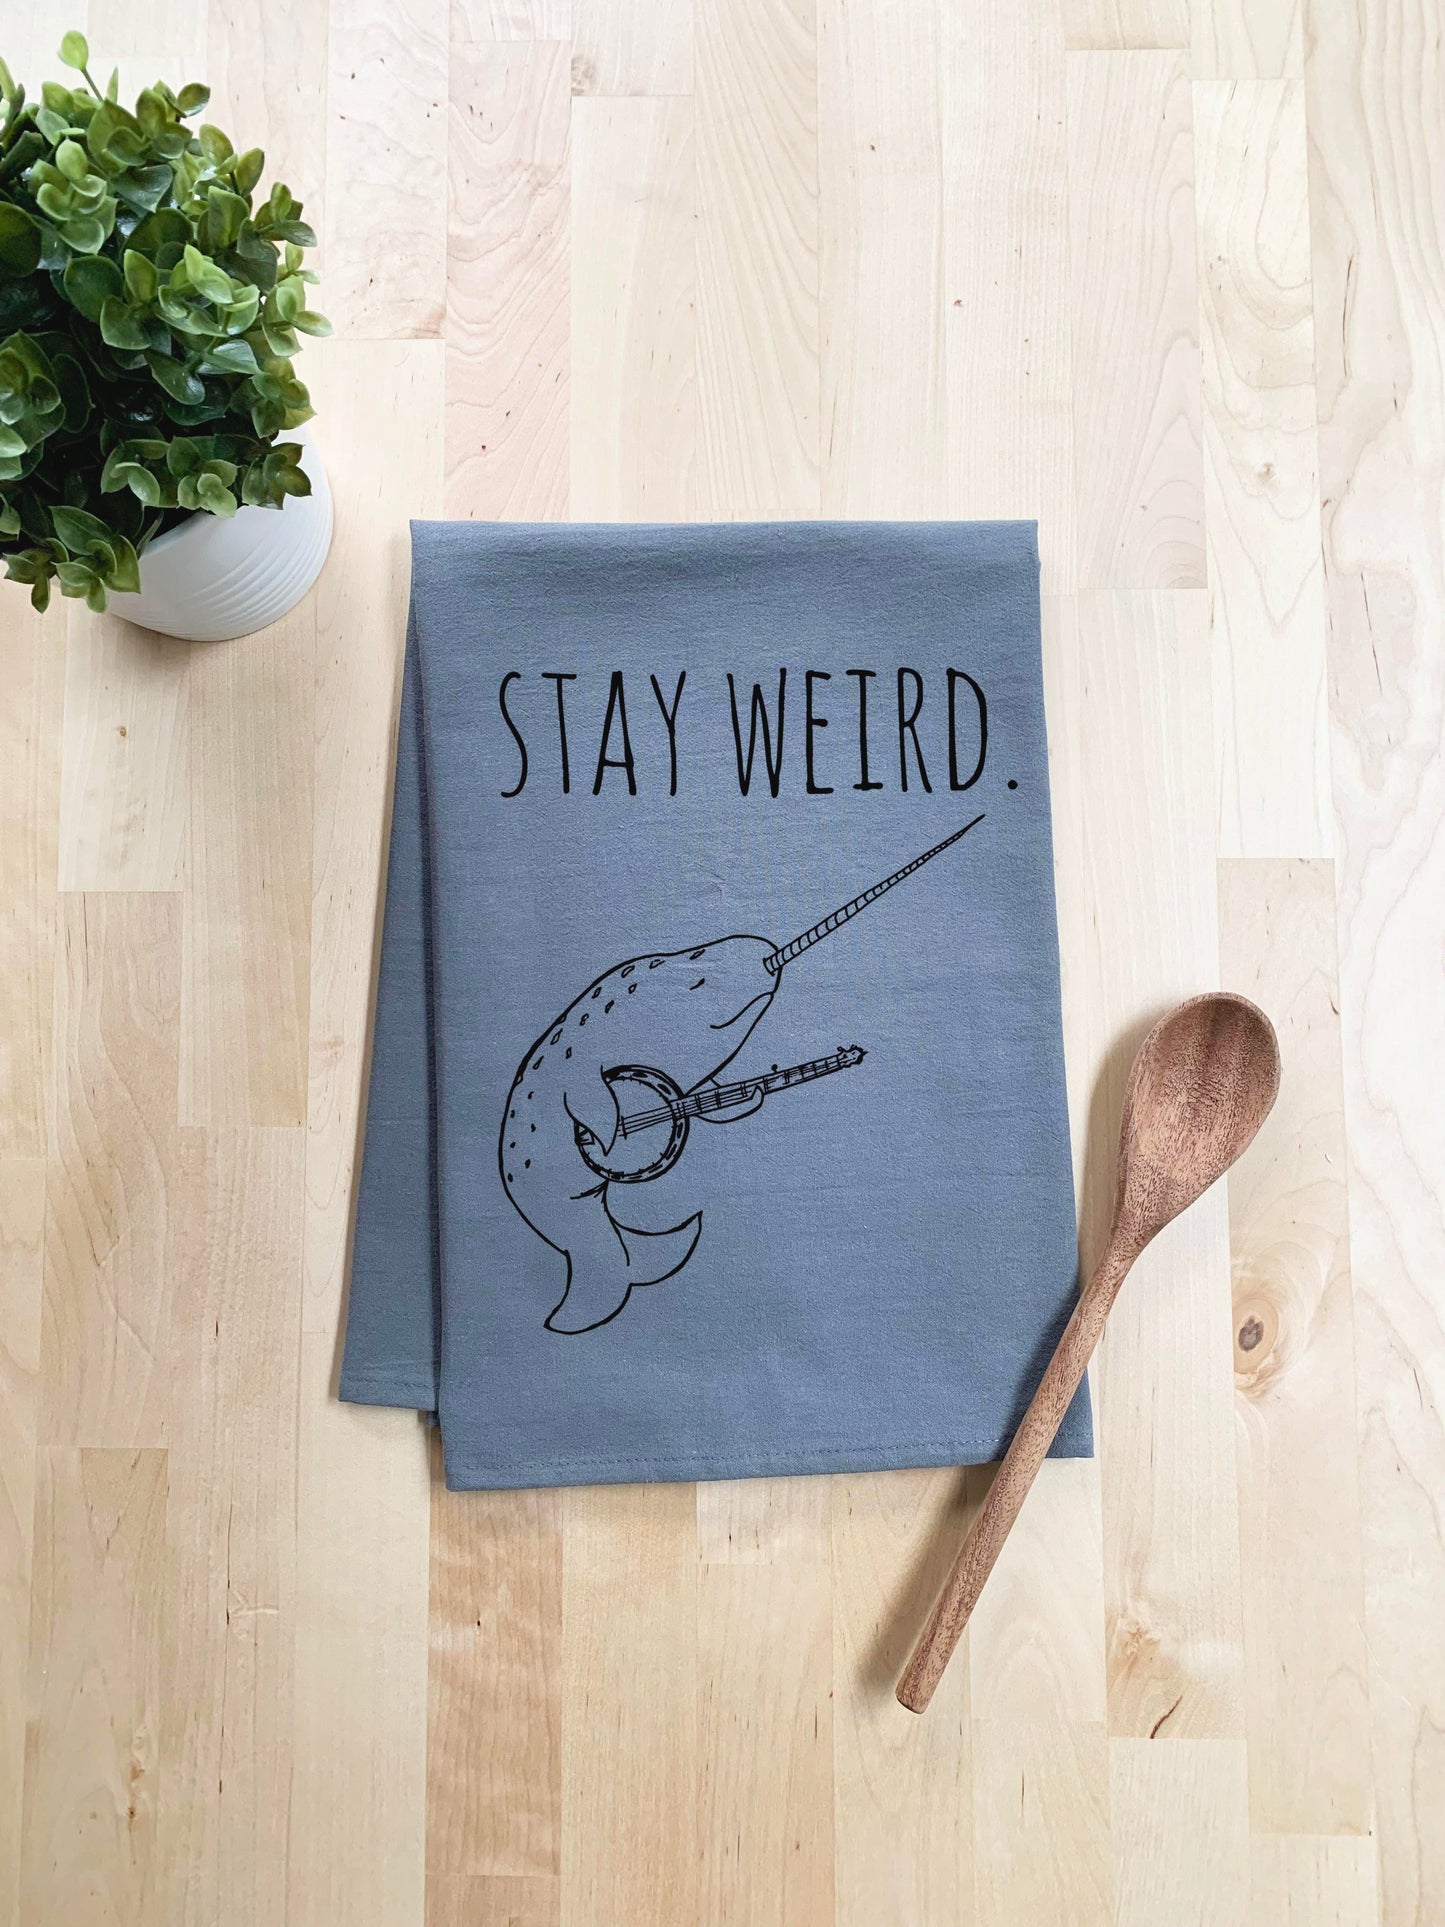 Stay Weird (Narwhal) Dish Towel - White Or Gray - MoonlightMakers